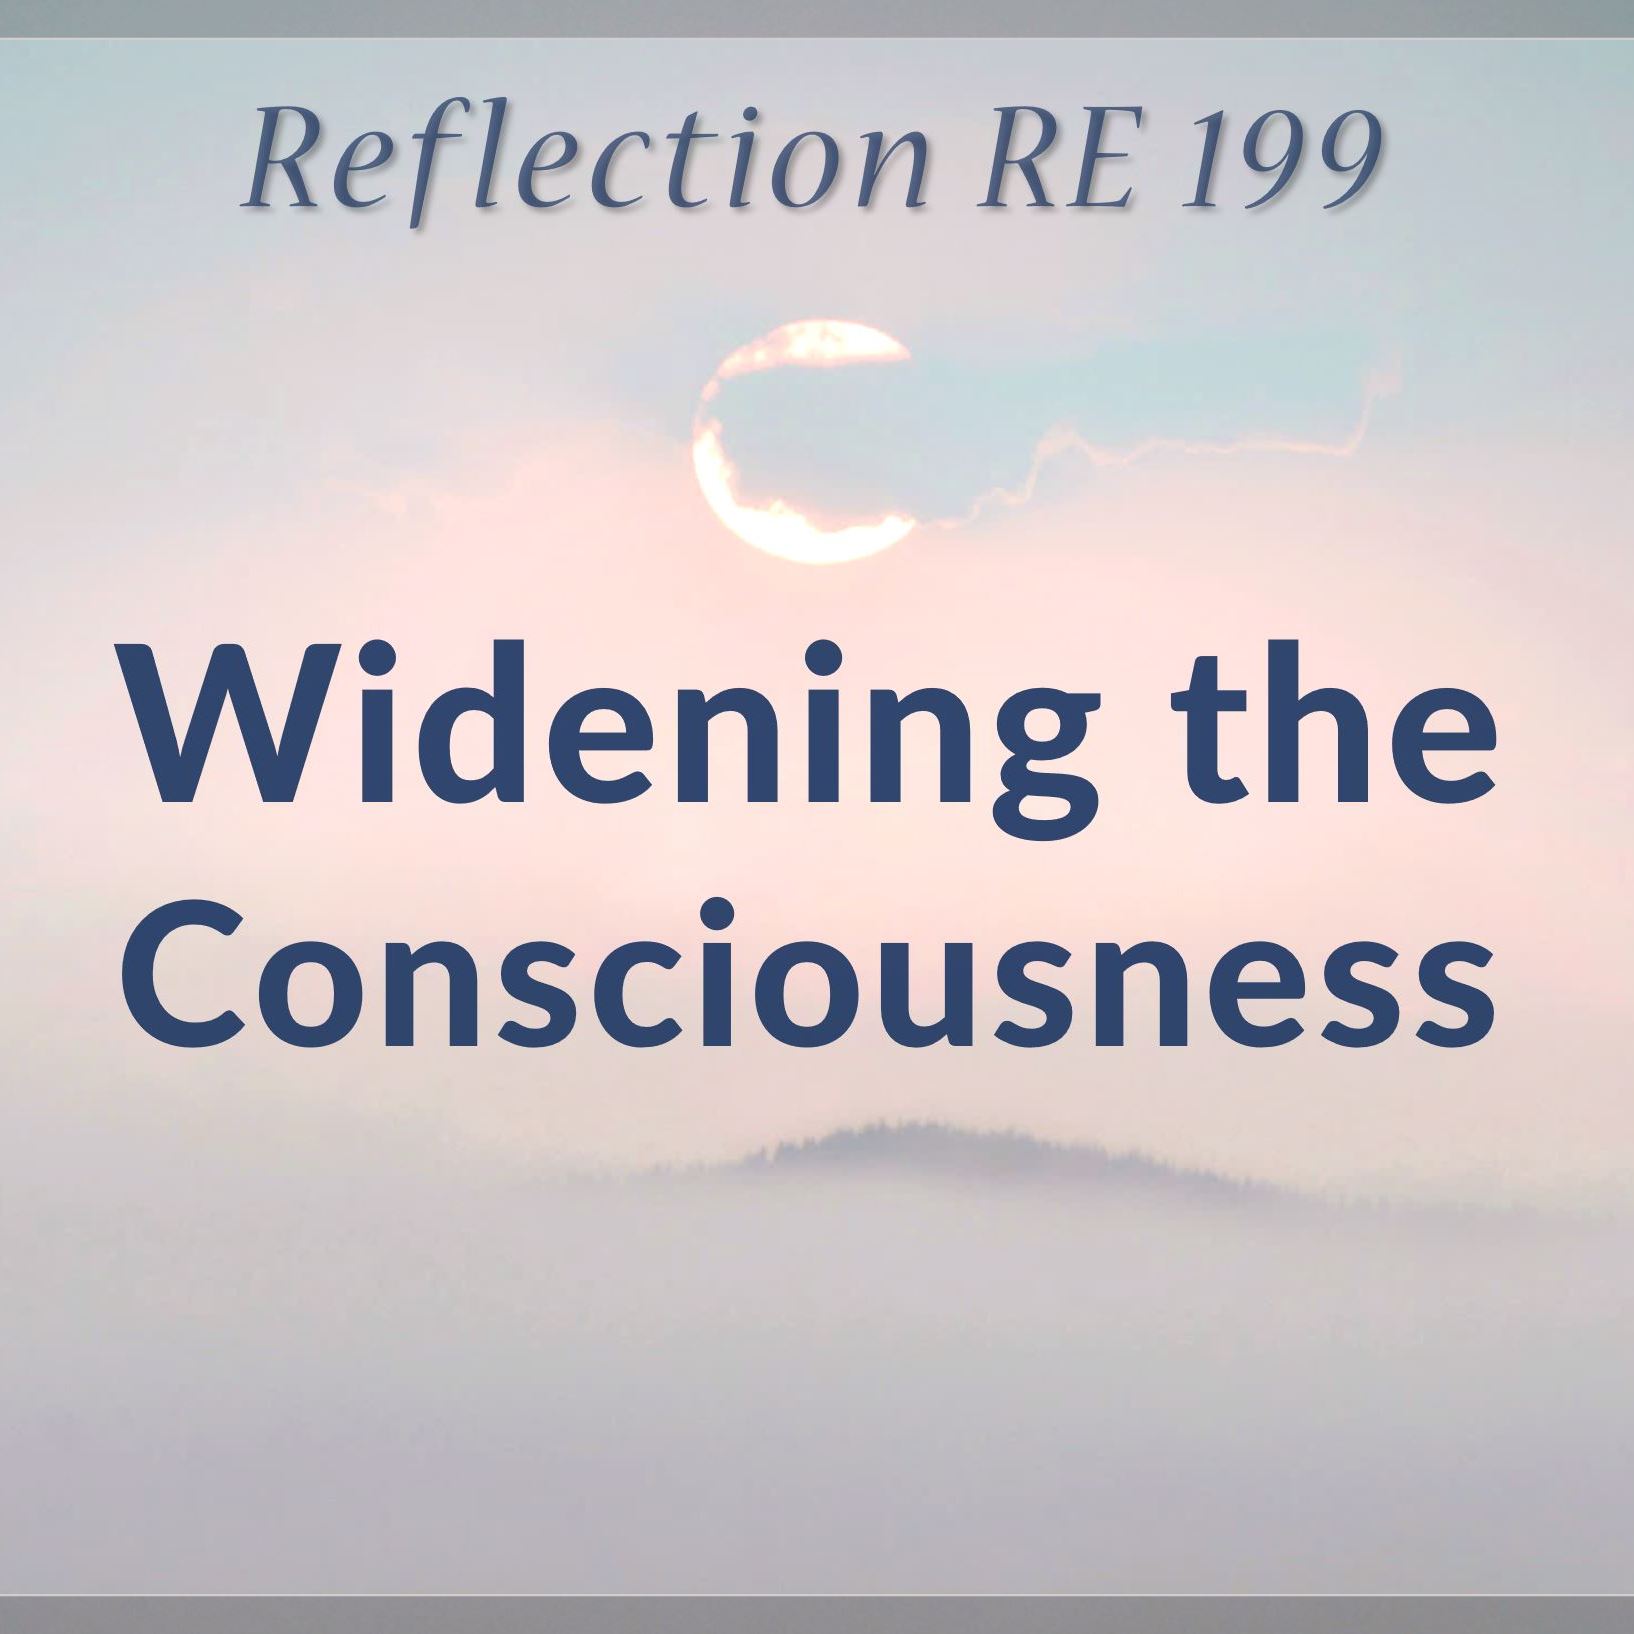 RE 199: Widening the Consciousness